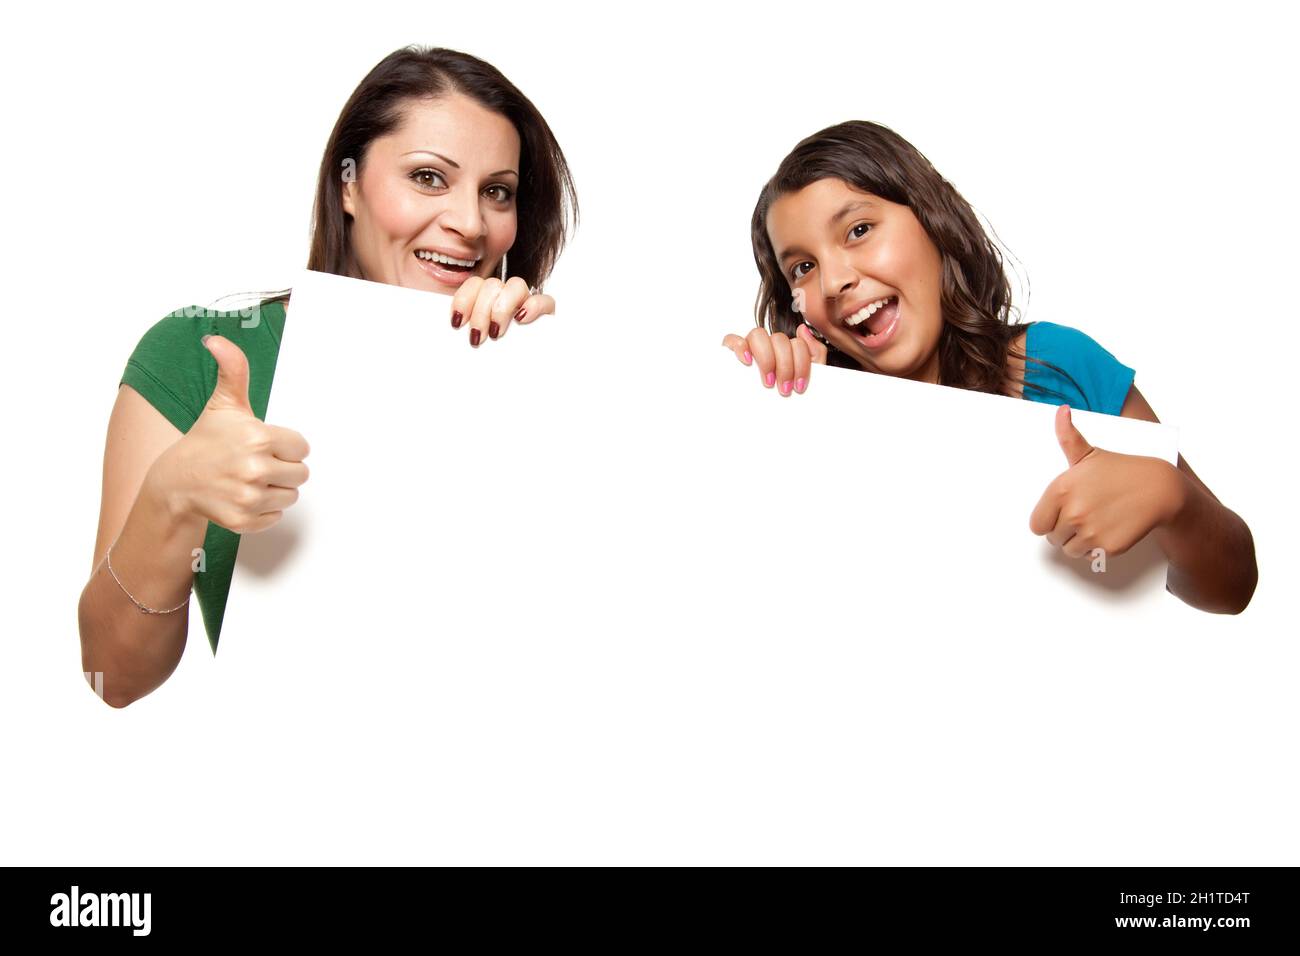 Pretty Hispanic Girl and Mother Holding Blank Board Isolated on a White Background. Stock Photo